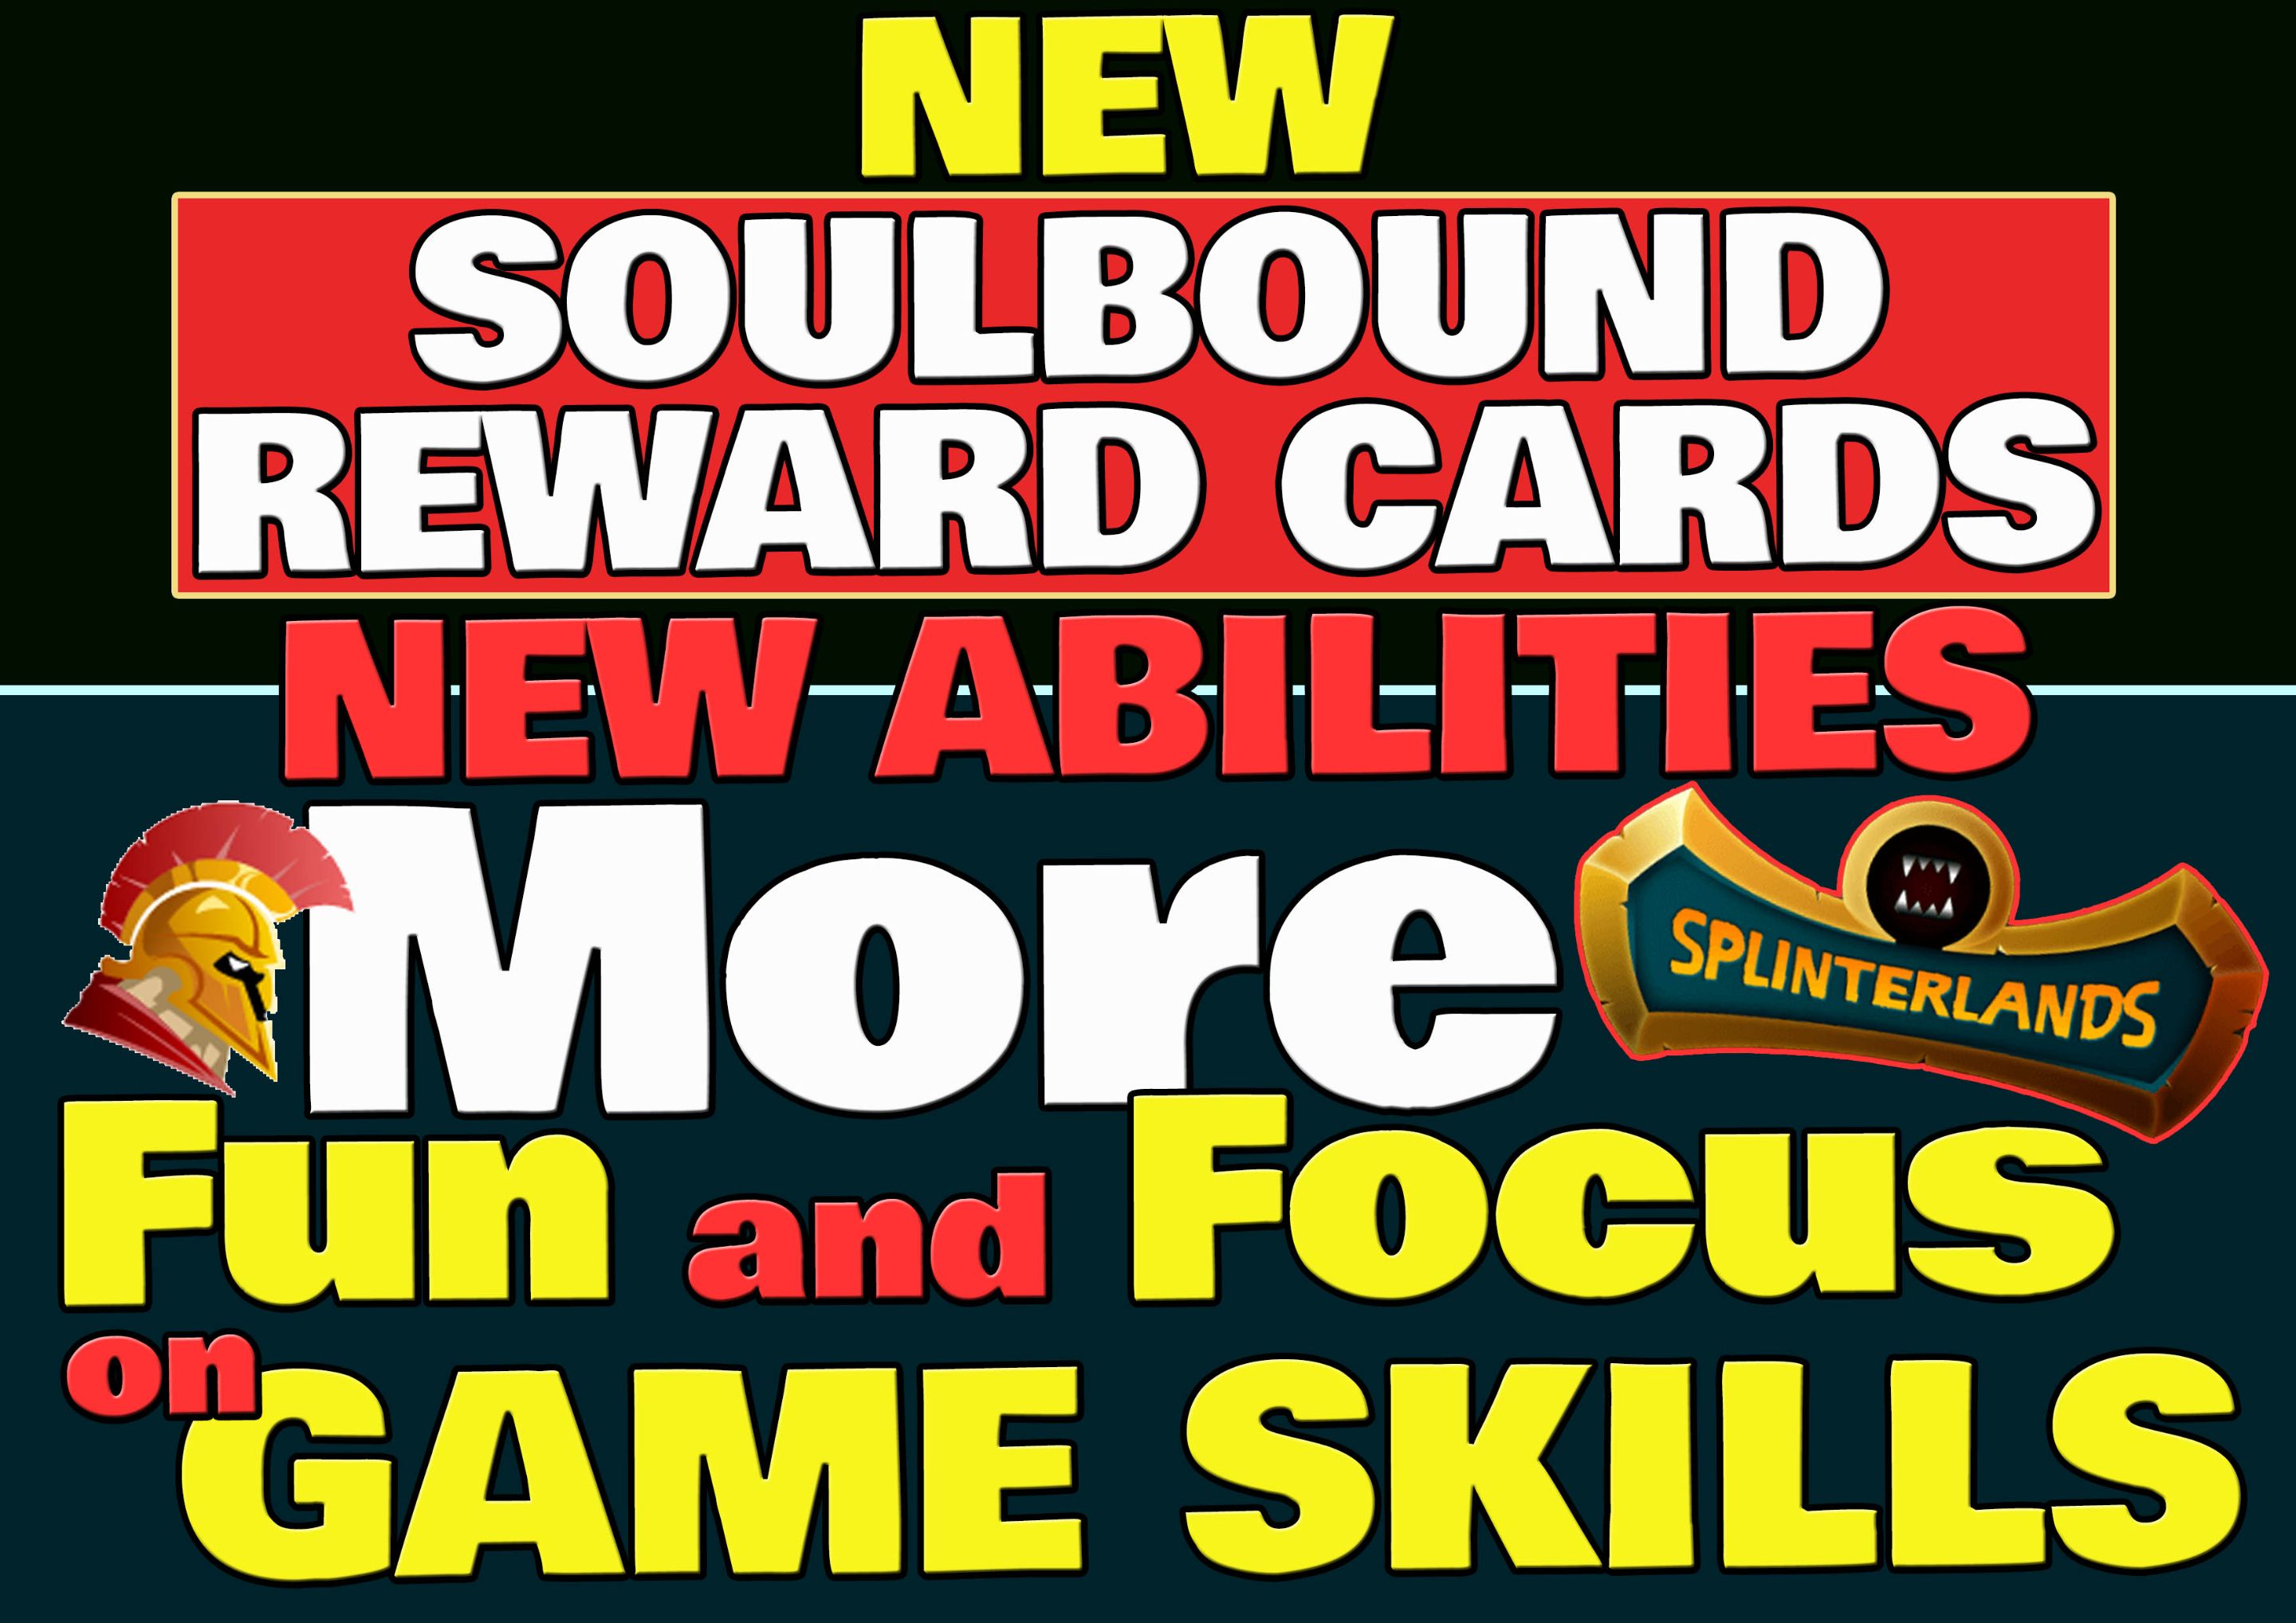 @libertycrypto27/soulbound-reward-cards-new-abilities-and-introduction-di-3-rulesets-in-gold-leagues-more-fun-and-more-foocus-on-game-skills-e